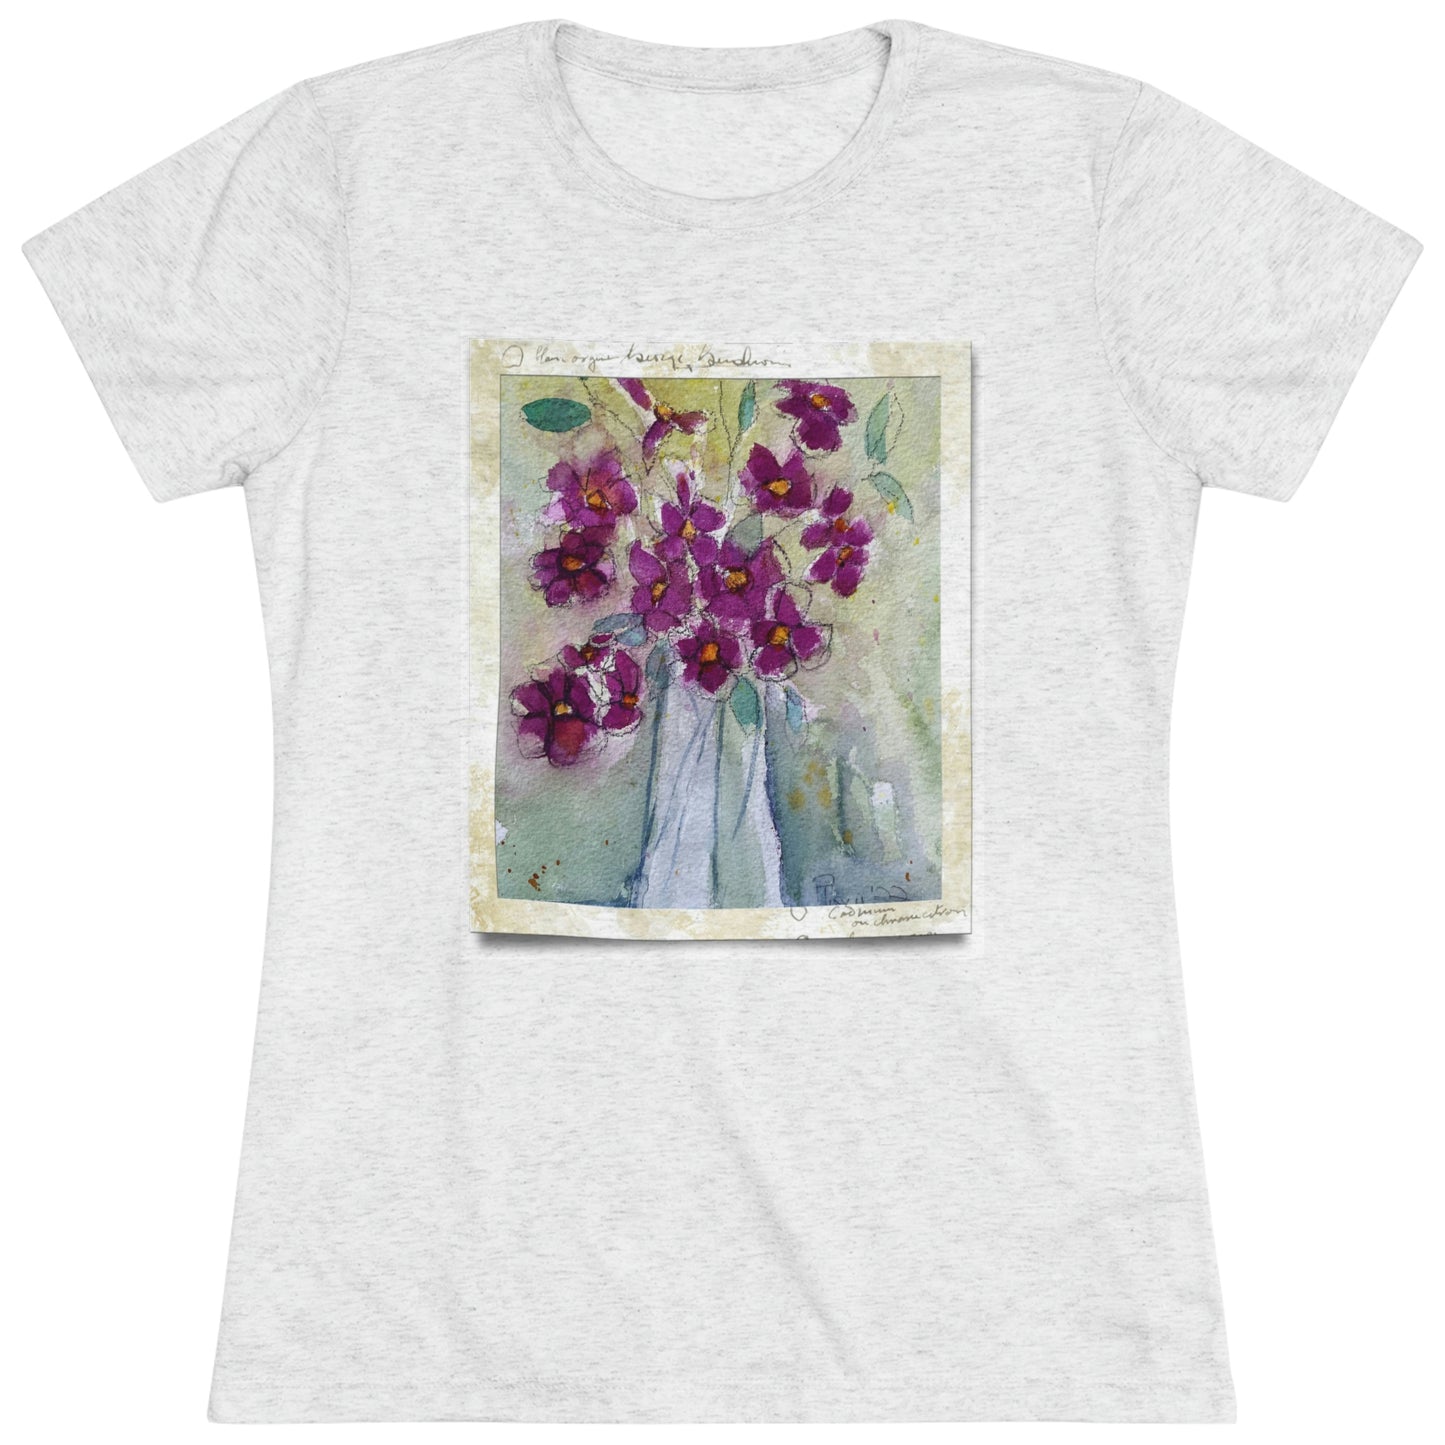 Pink Wildflowers Women's fitted Triblend Tee  tee shirt